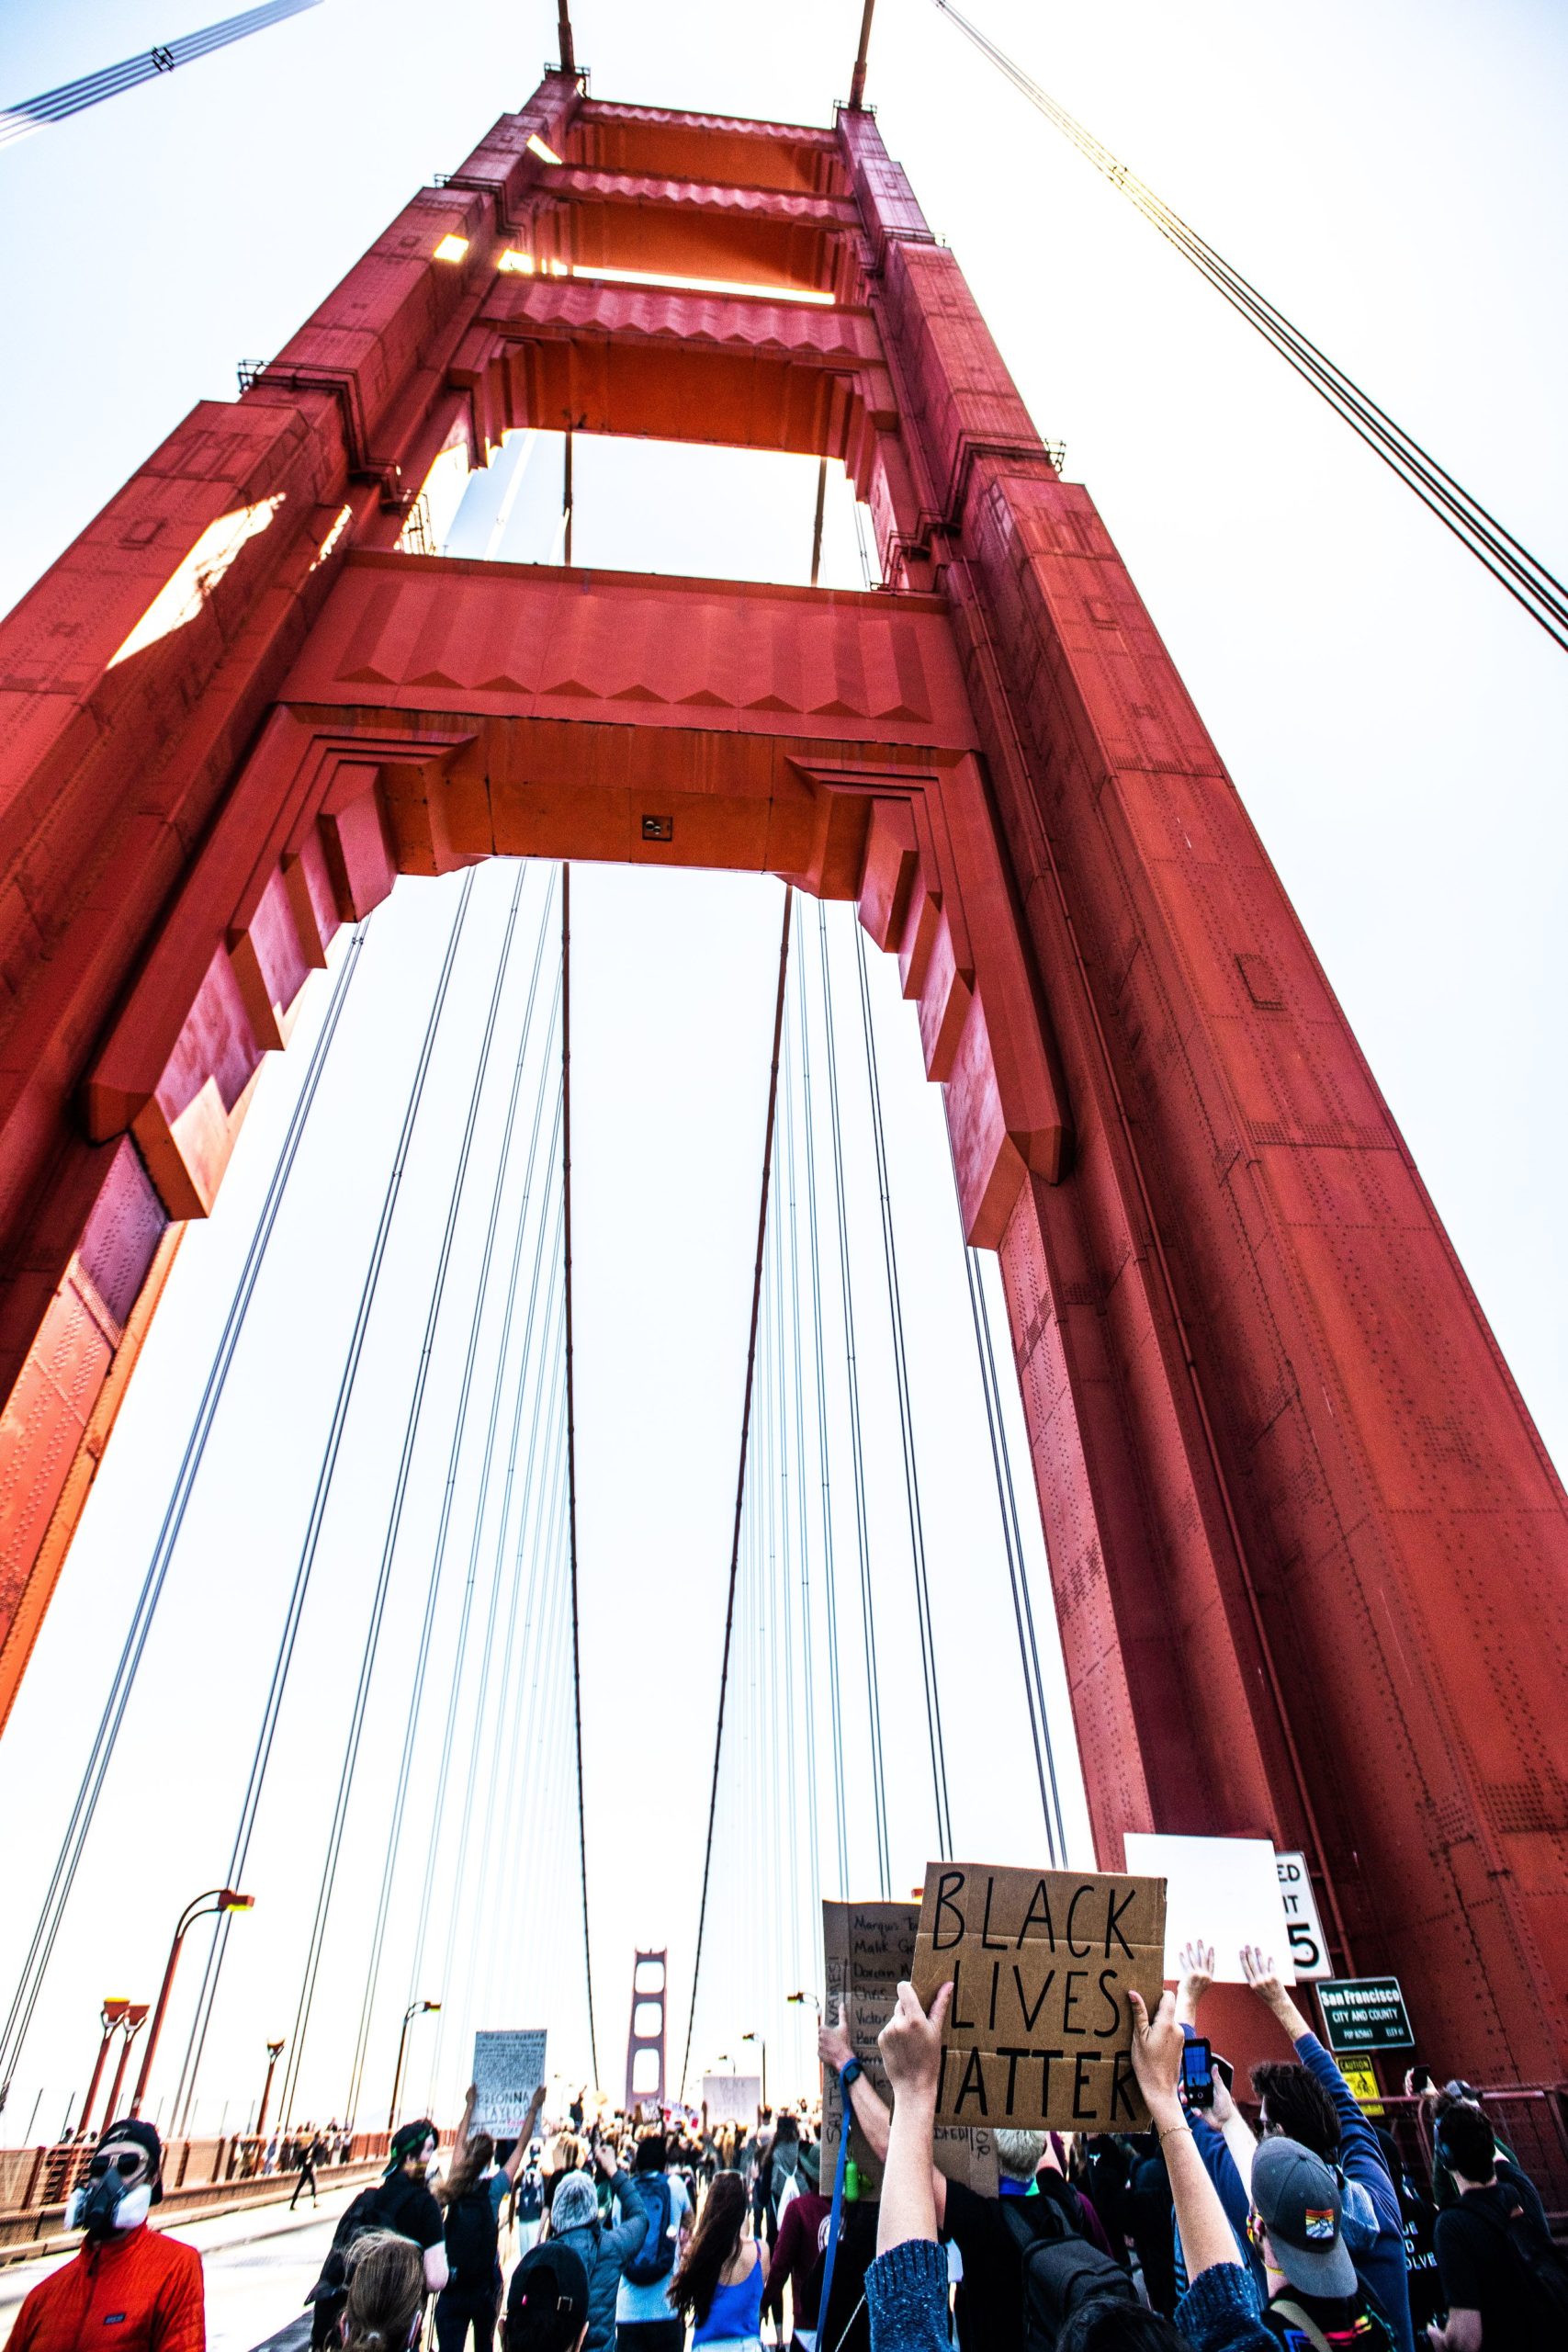 Mandatory Credit: Photo by Chris Tuite/ImageSPACE/Shutterstock (10672244i)
Protestors demonstrate on the Golden Gate Bridge after the death of George Floyd. Protestors climbed over the rails and demonstrated in the lanes causing a shutdown of South Bound traffic.
Black Lives Matter protest, San Francisco, California, USA - 06 Jun 2020